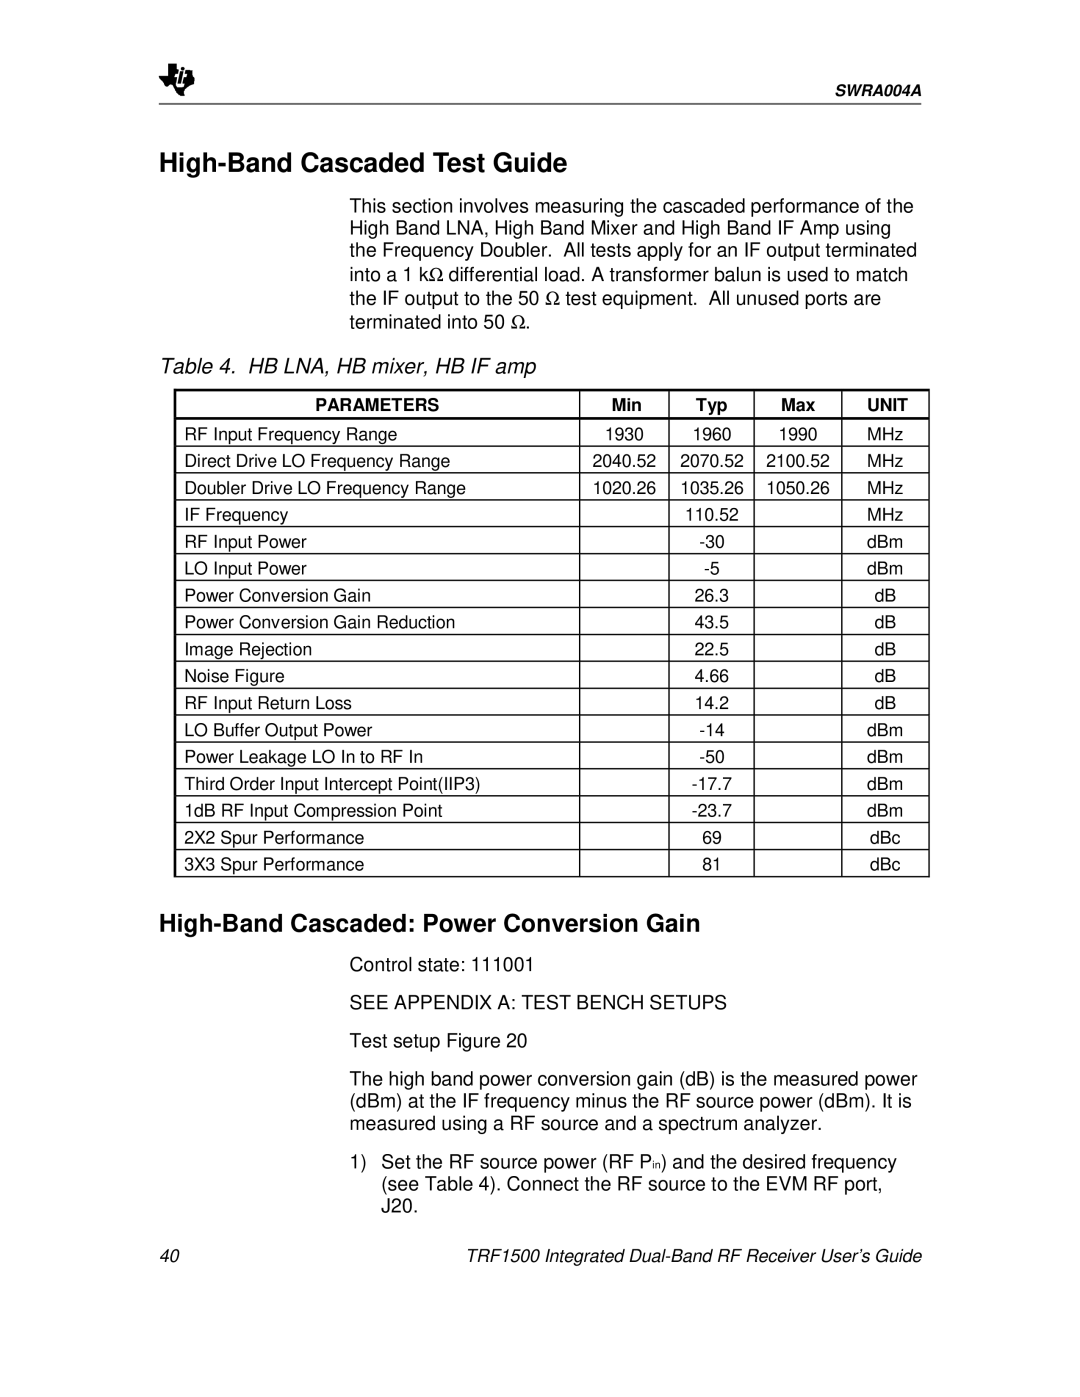 Texas Instruments TRF1500 manual High-BandCascaded Test Guide, High-BandCascaded Power Conversion Gain 